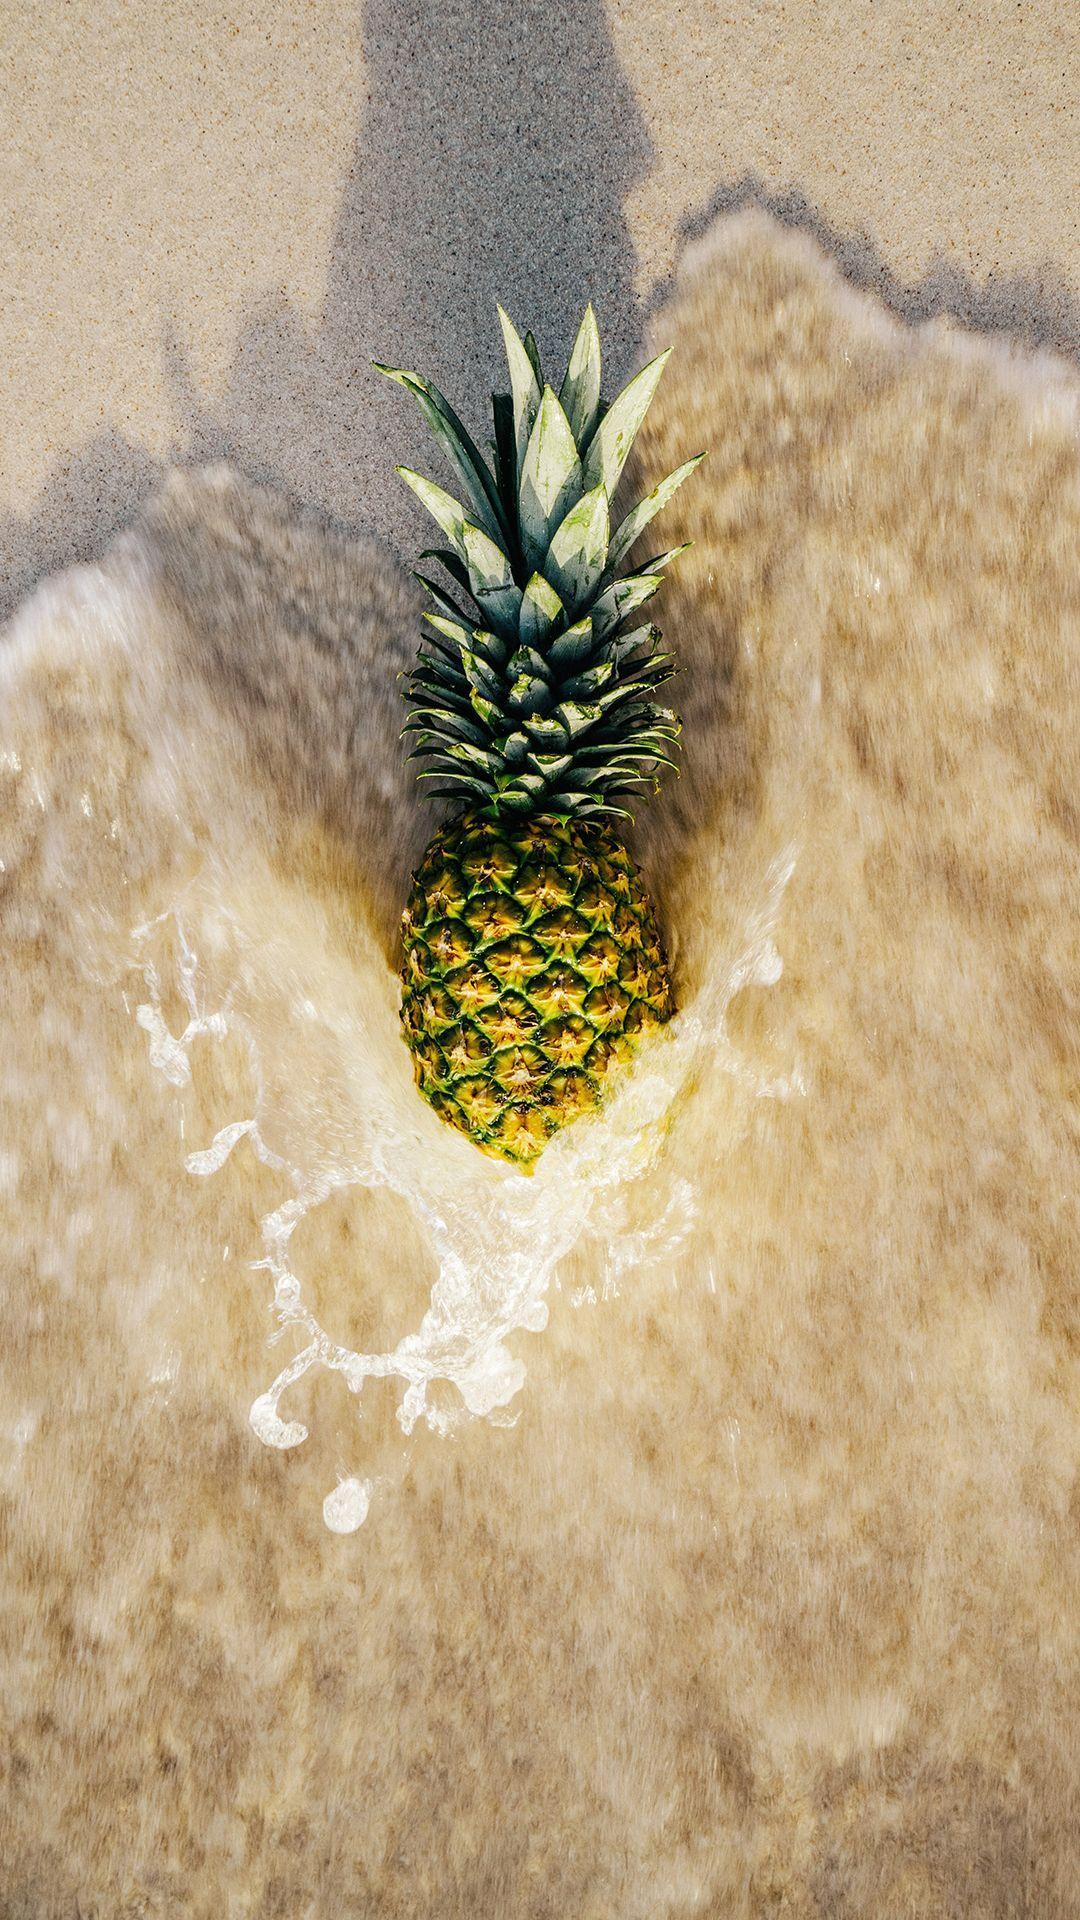 Cool Pineapple Background for iPhones. Pineapple Supply Co